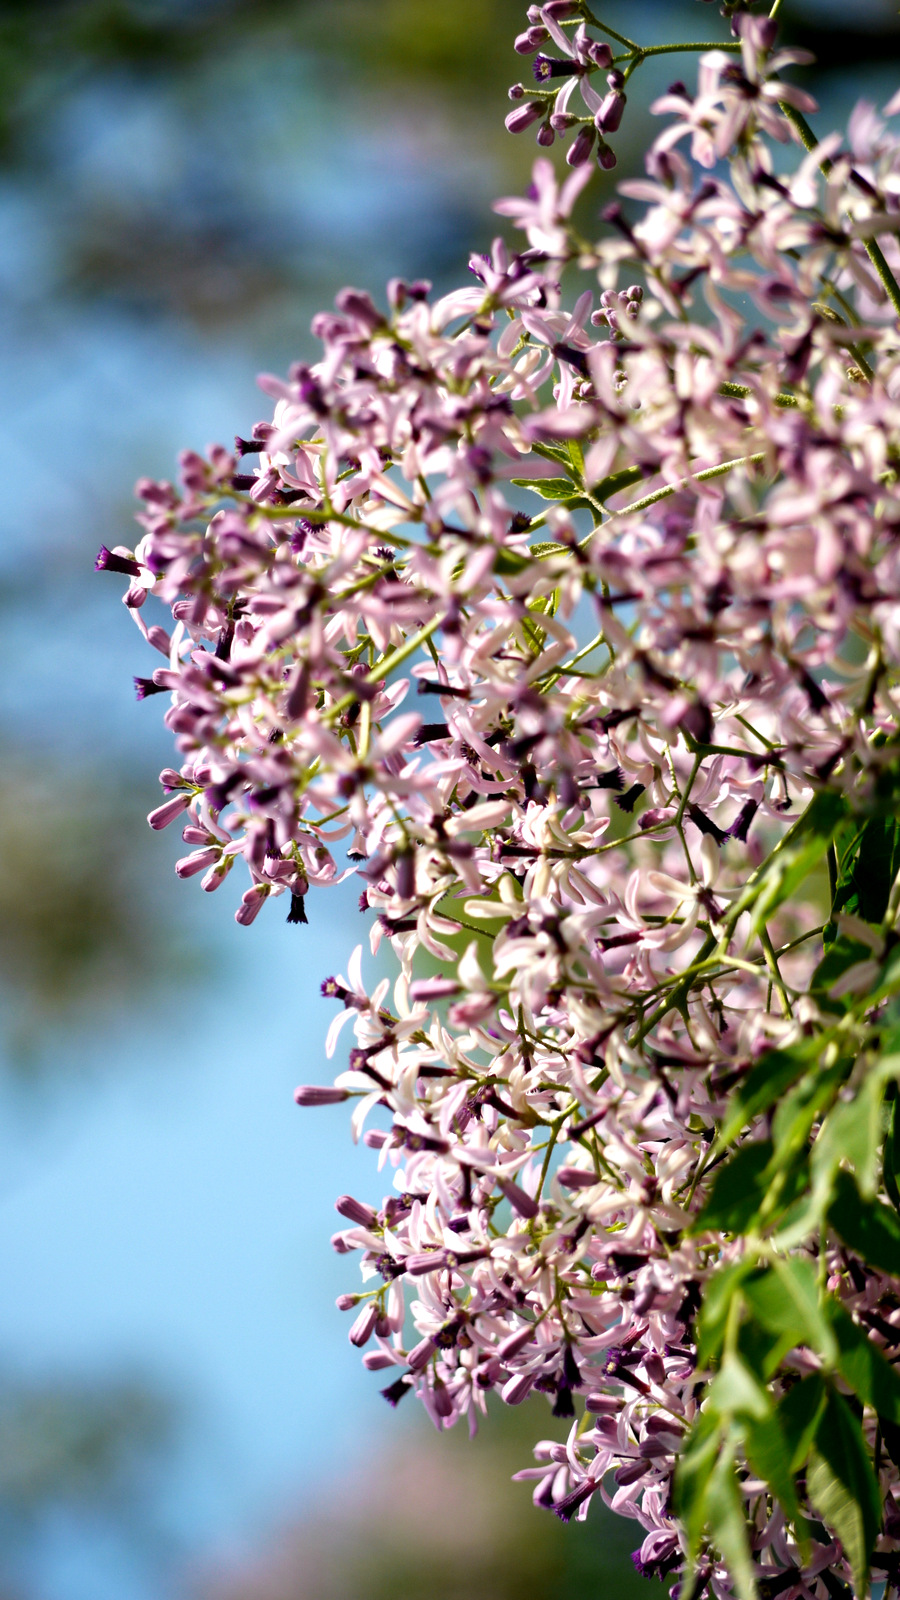 purple lilacs are blooming in front of a blurred sky